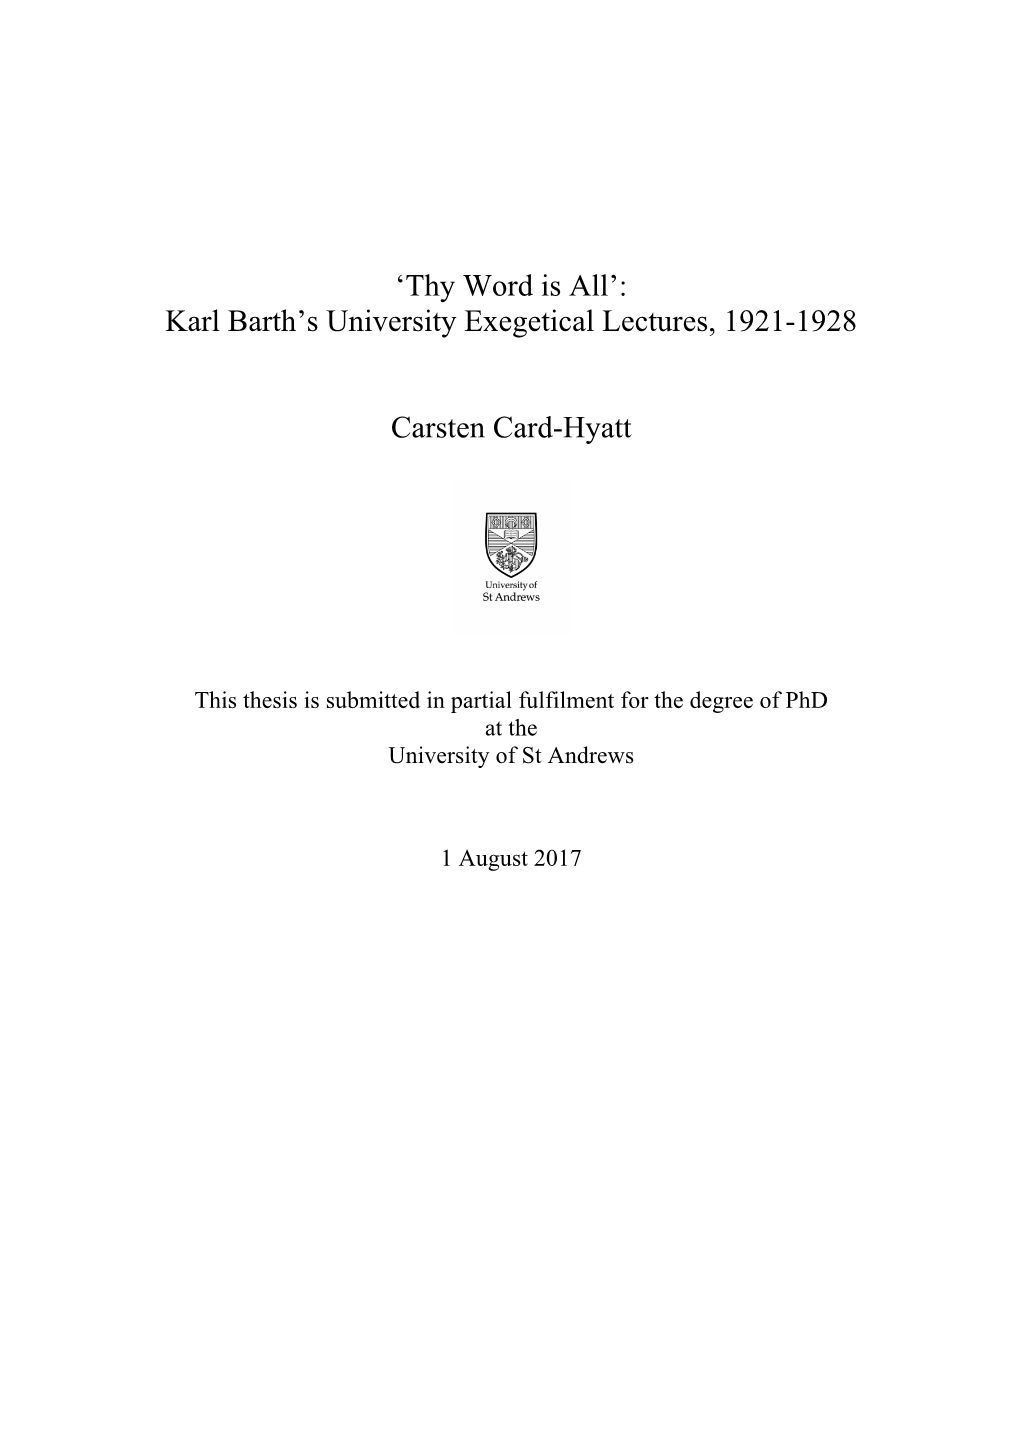 'Thy Word Is All' : Karl Barth's University Exegetical Lectures, 1921-1928